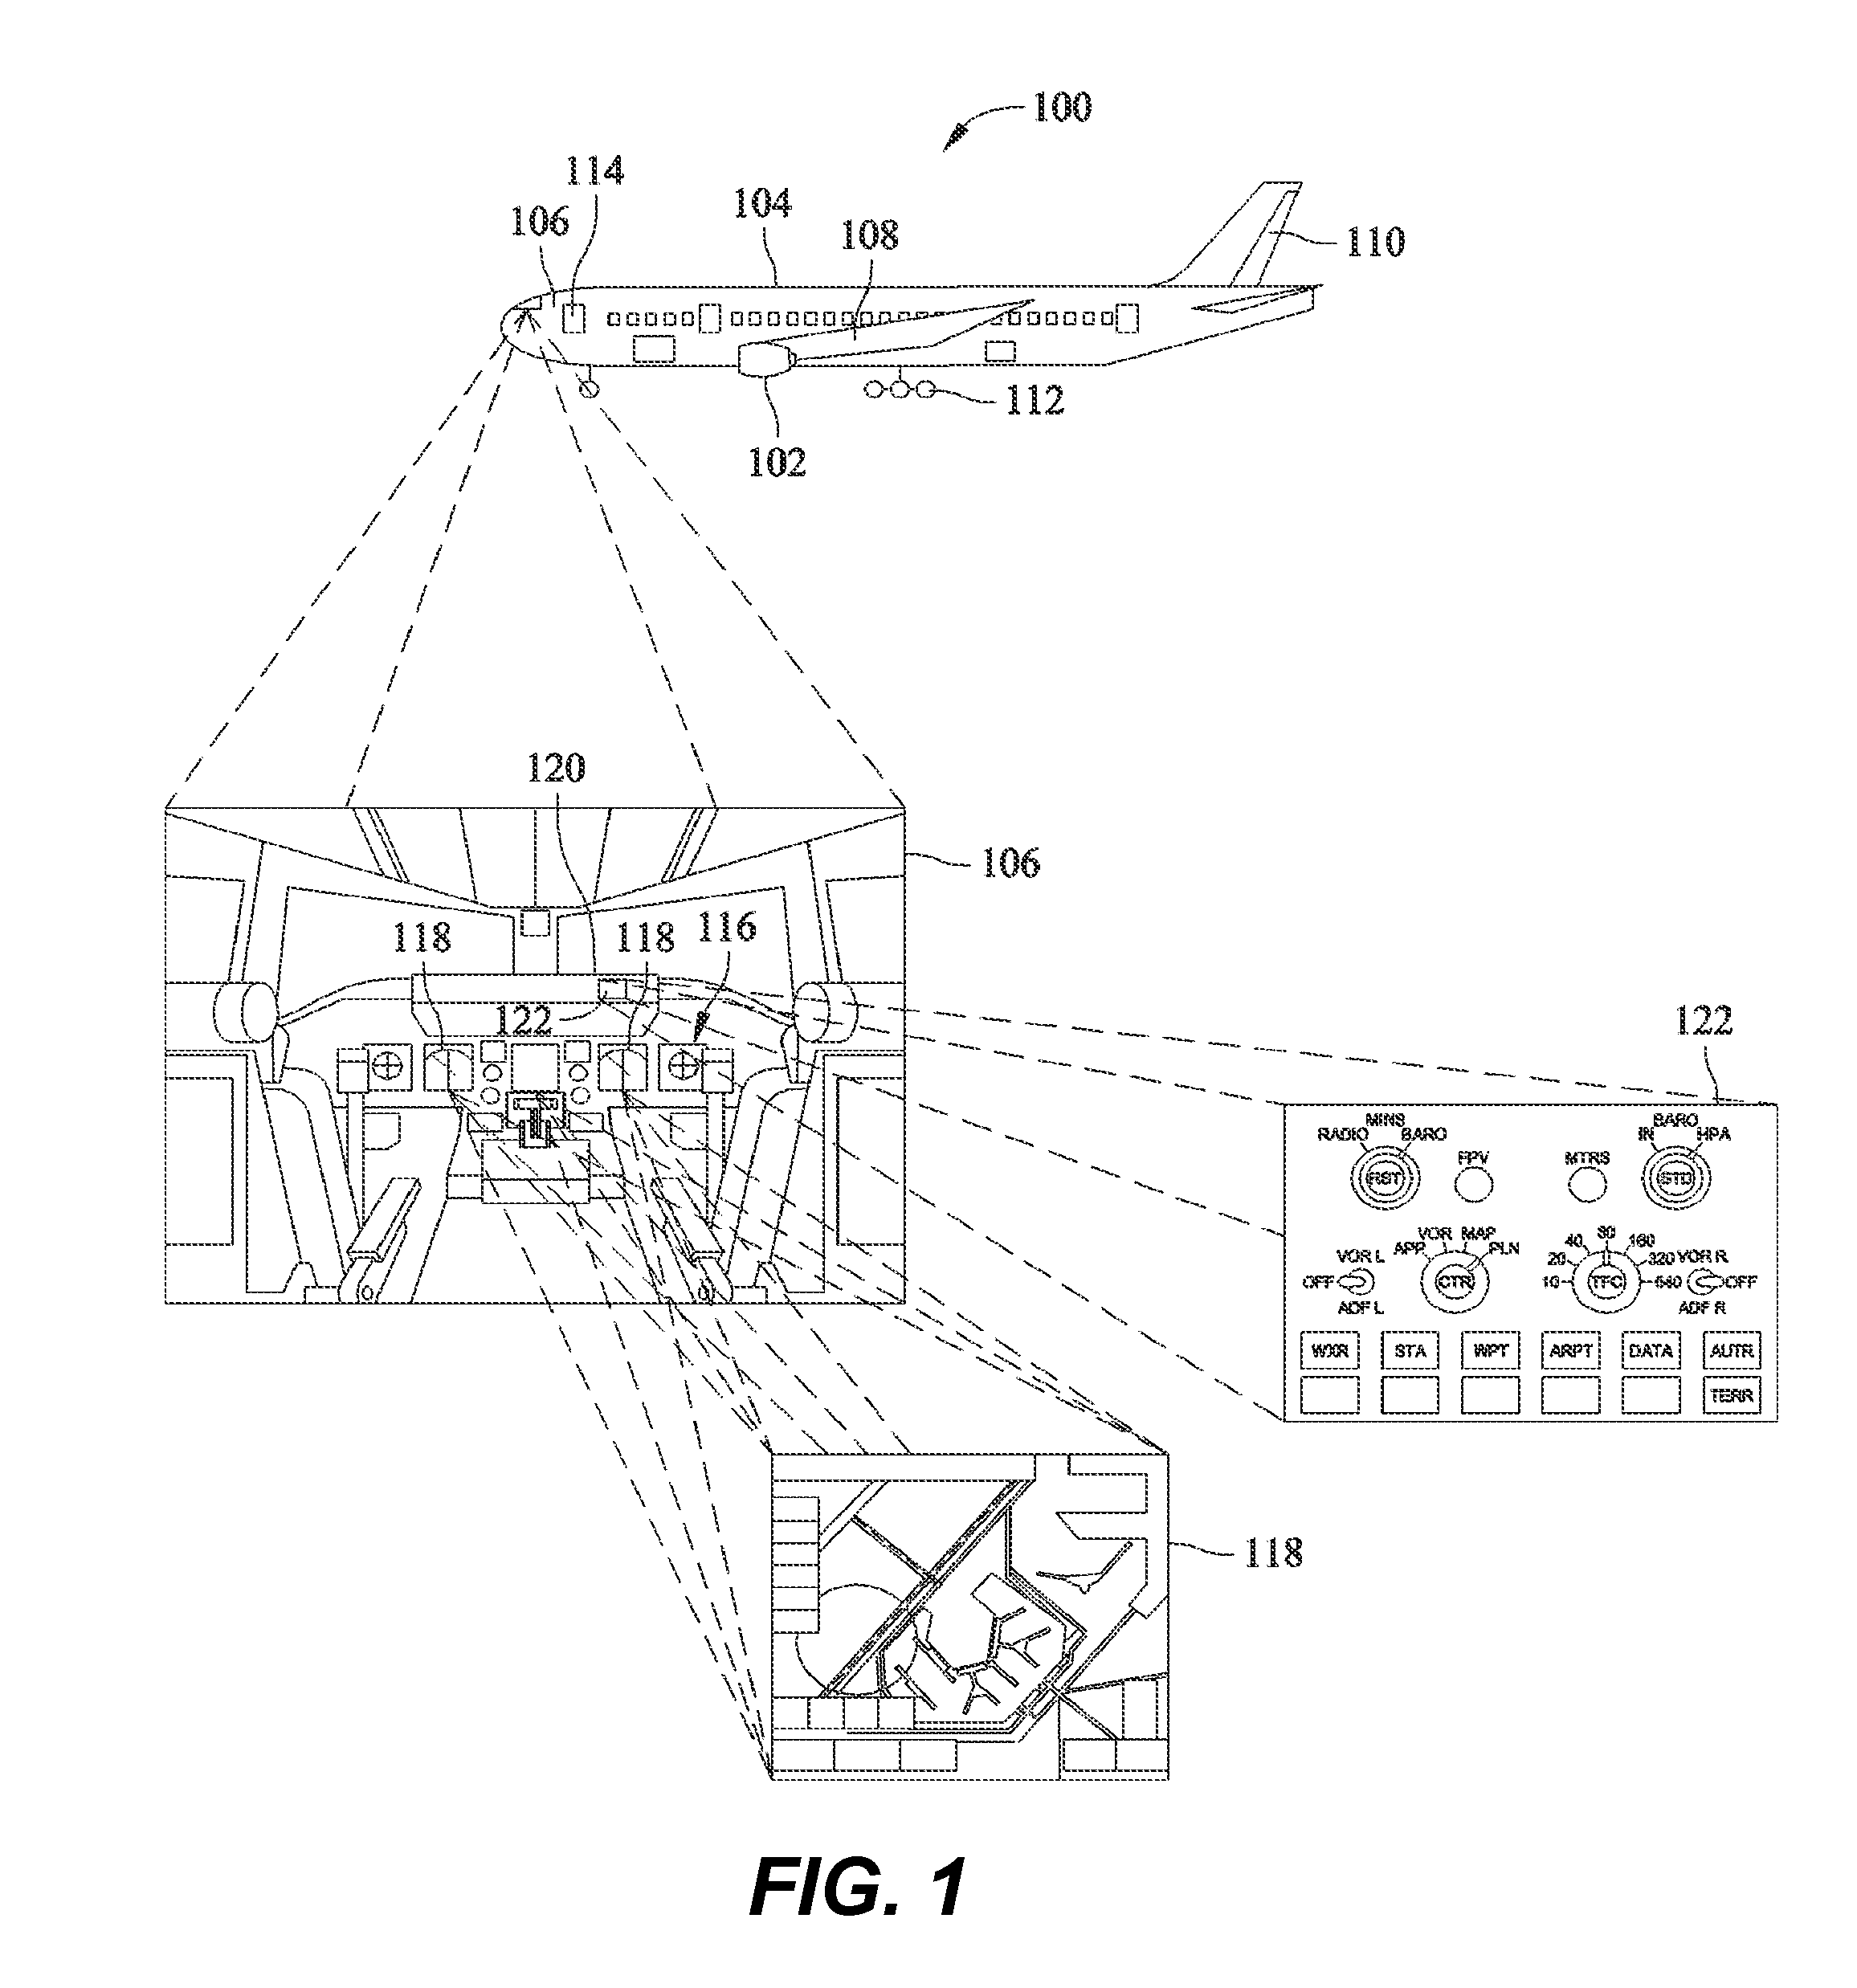 Methods and systems for filtering traffic information for display